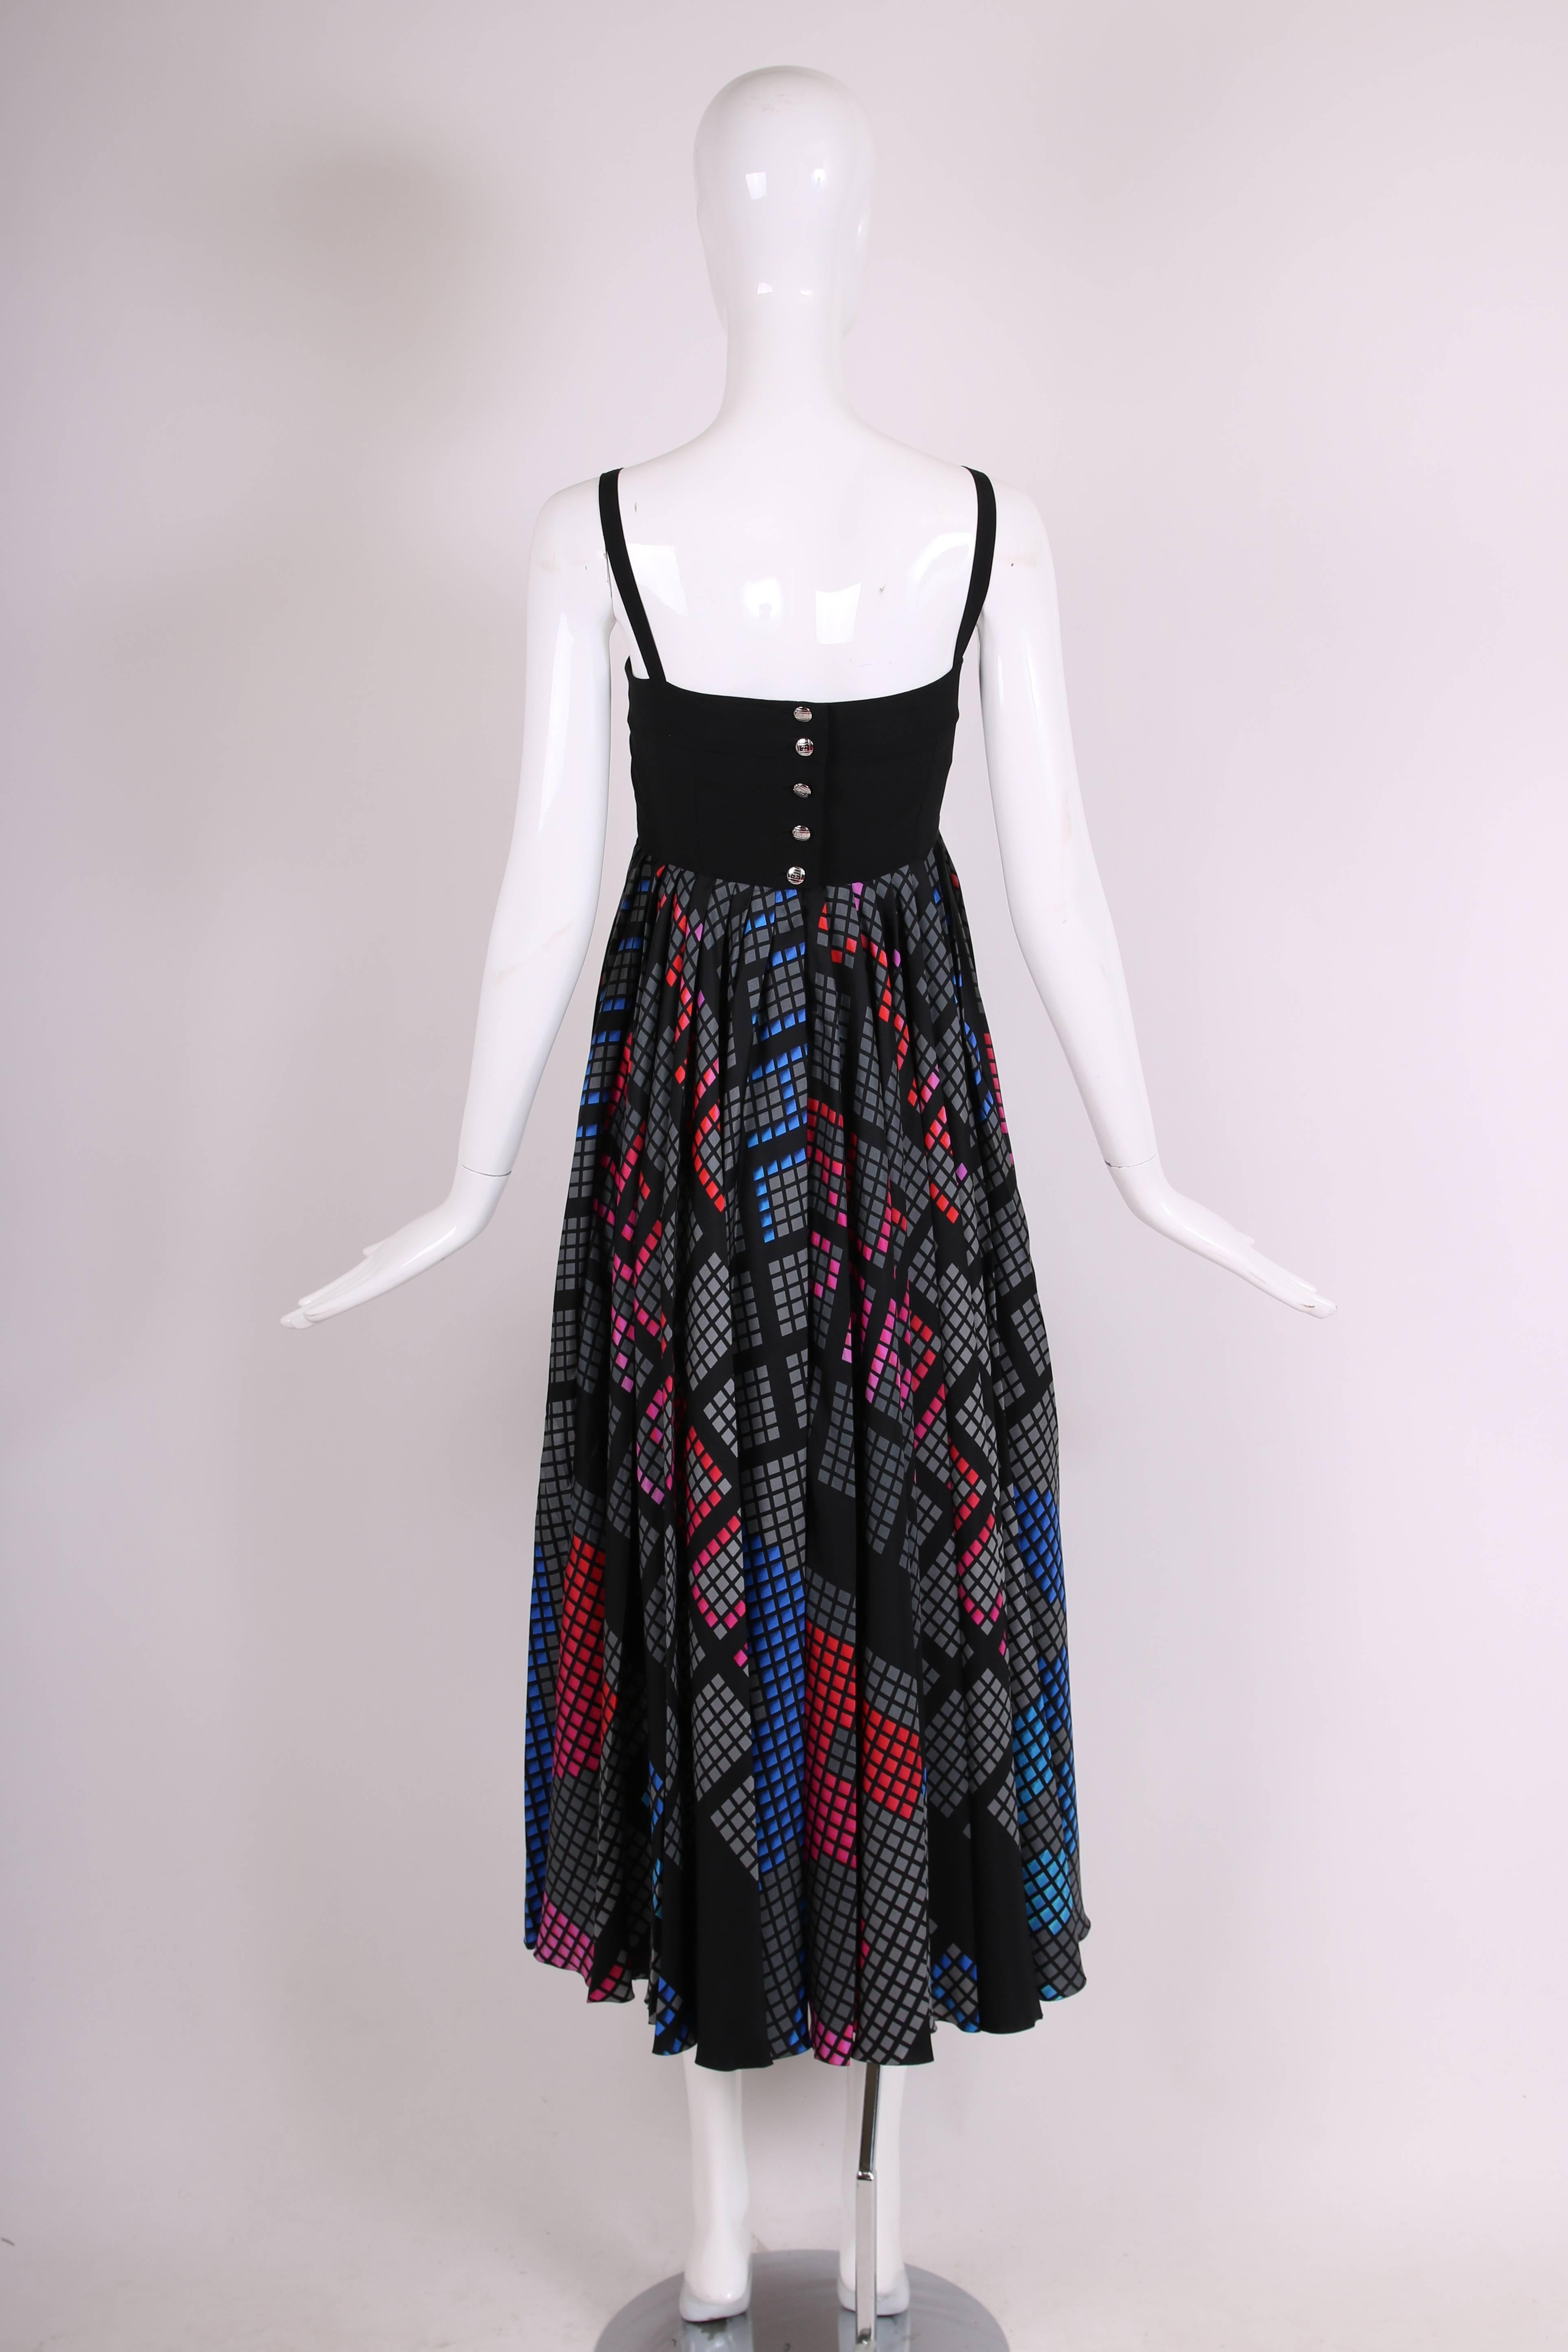 Women's Chanel Empire Waisted Silk Gown wth Techno Printed Pleated Skirt